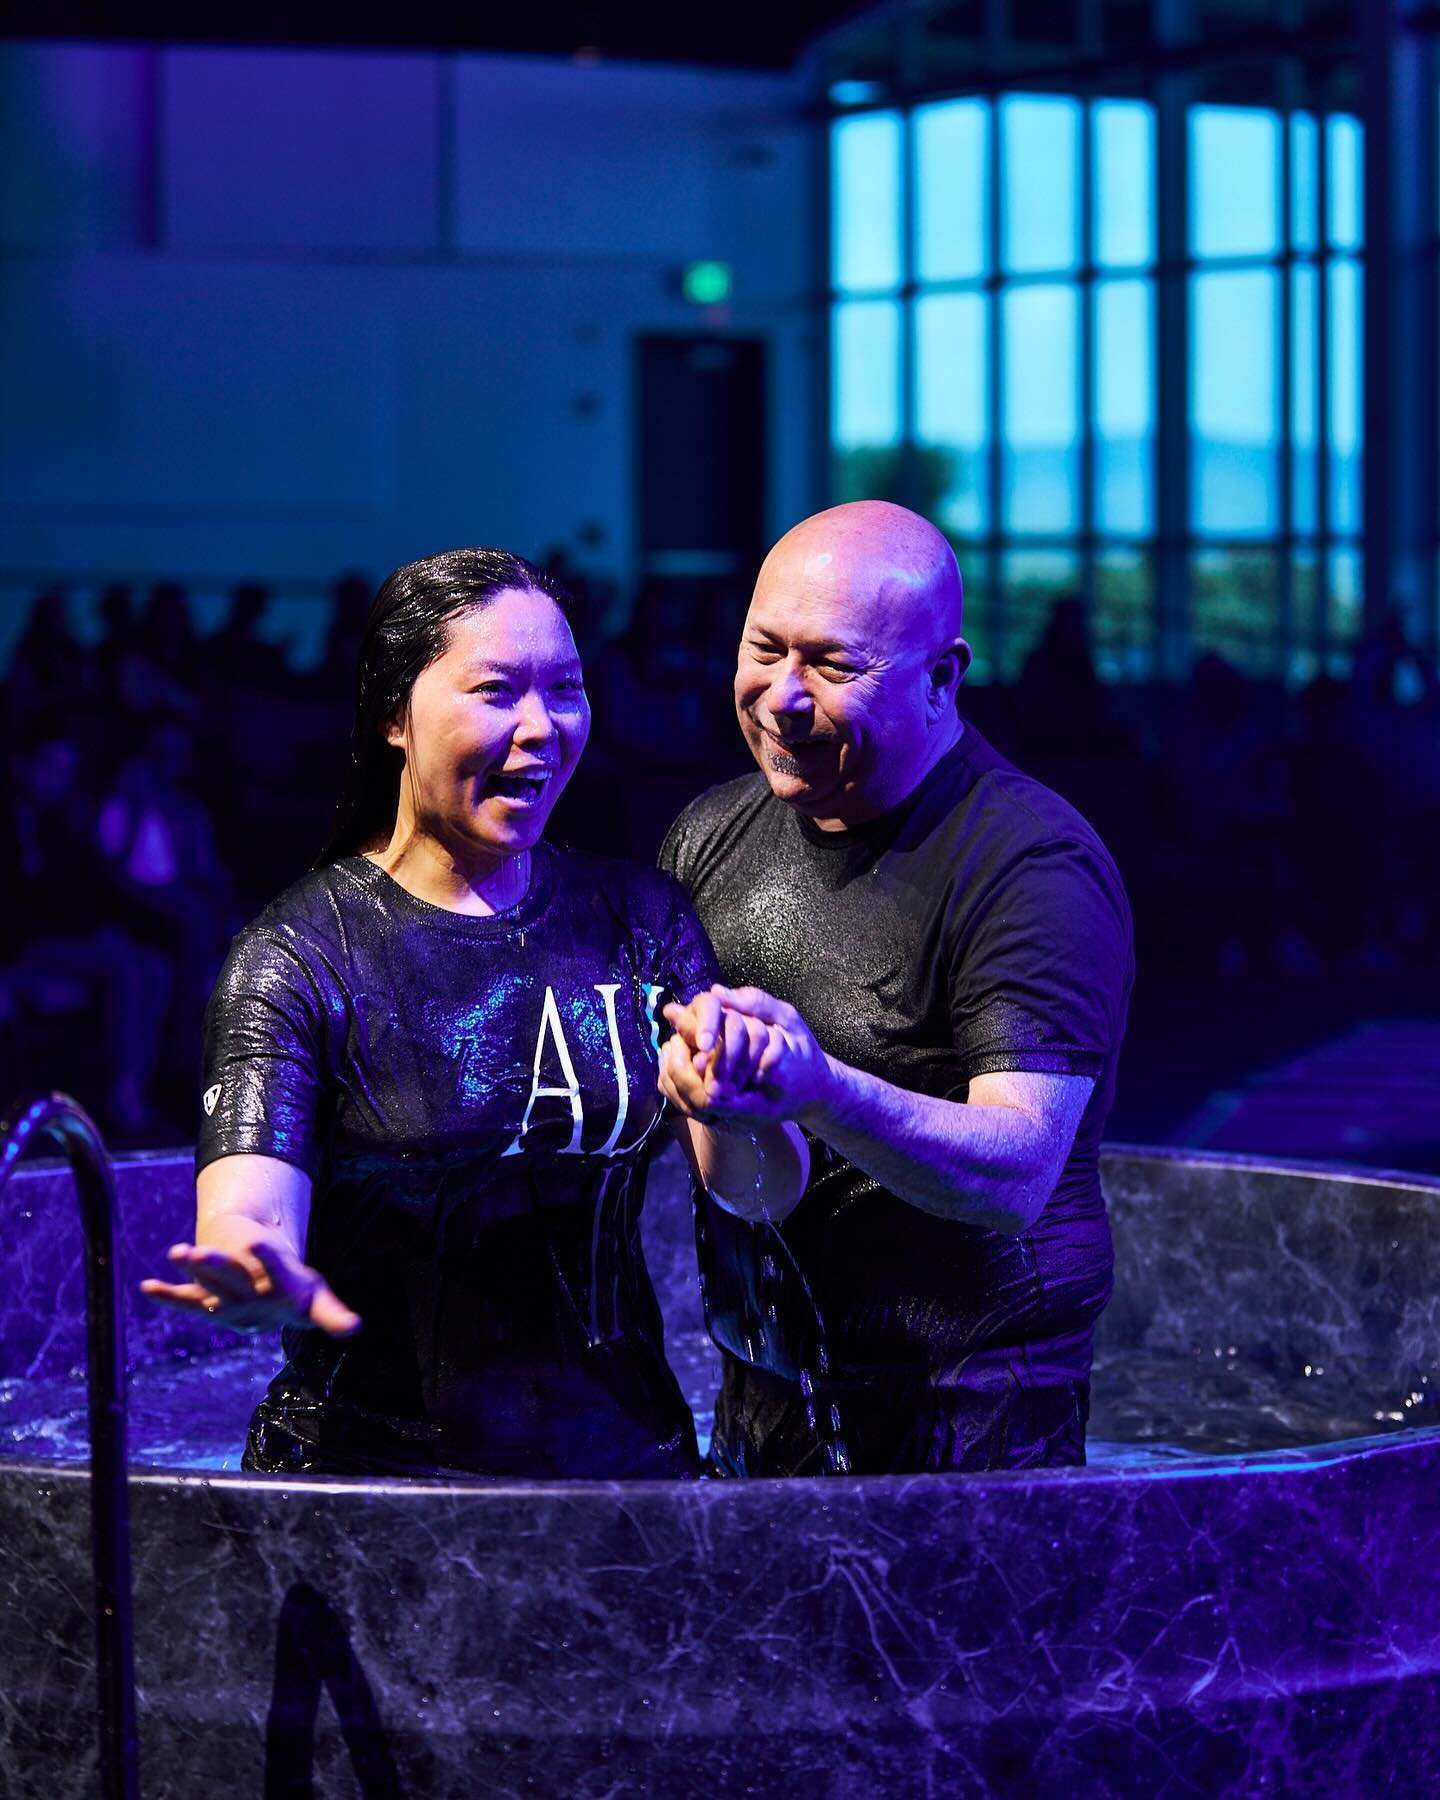 We are so happy to celebrate together as a church all the people that were baptized across our 3 campuses! We love you @bravechurch and we love seeing what God is doing here in the Bay Area!!! If you were not able to make it to hear the teaching, che